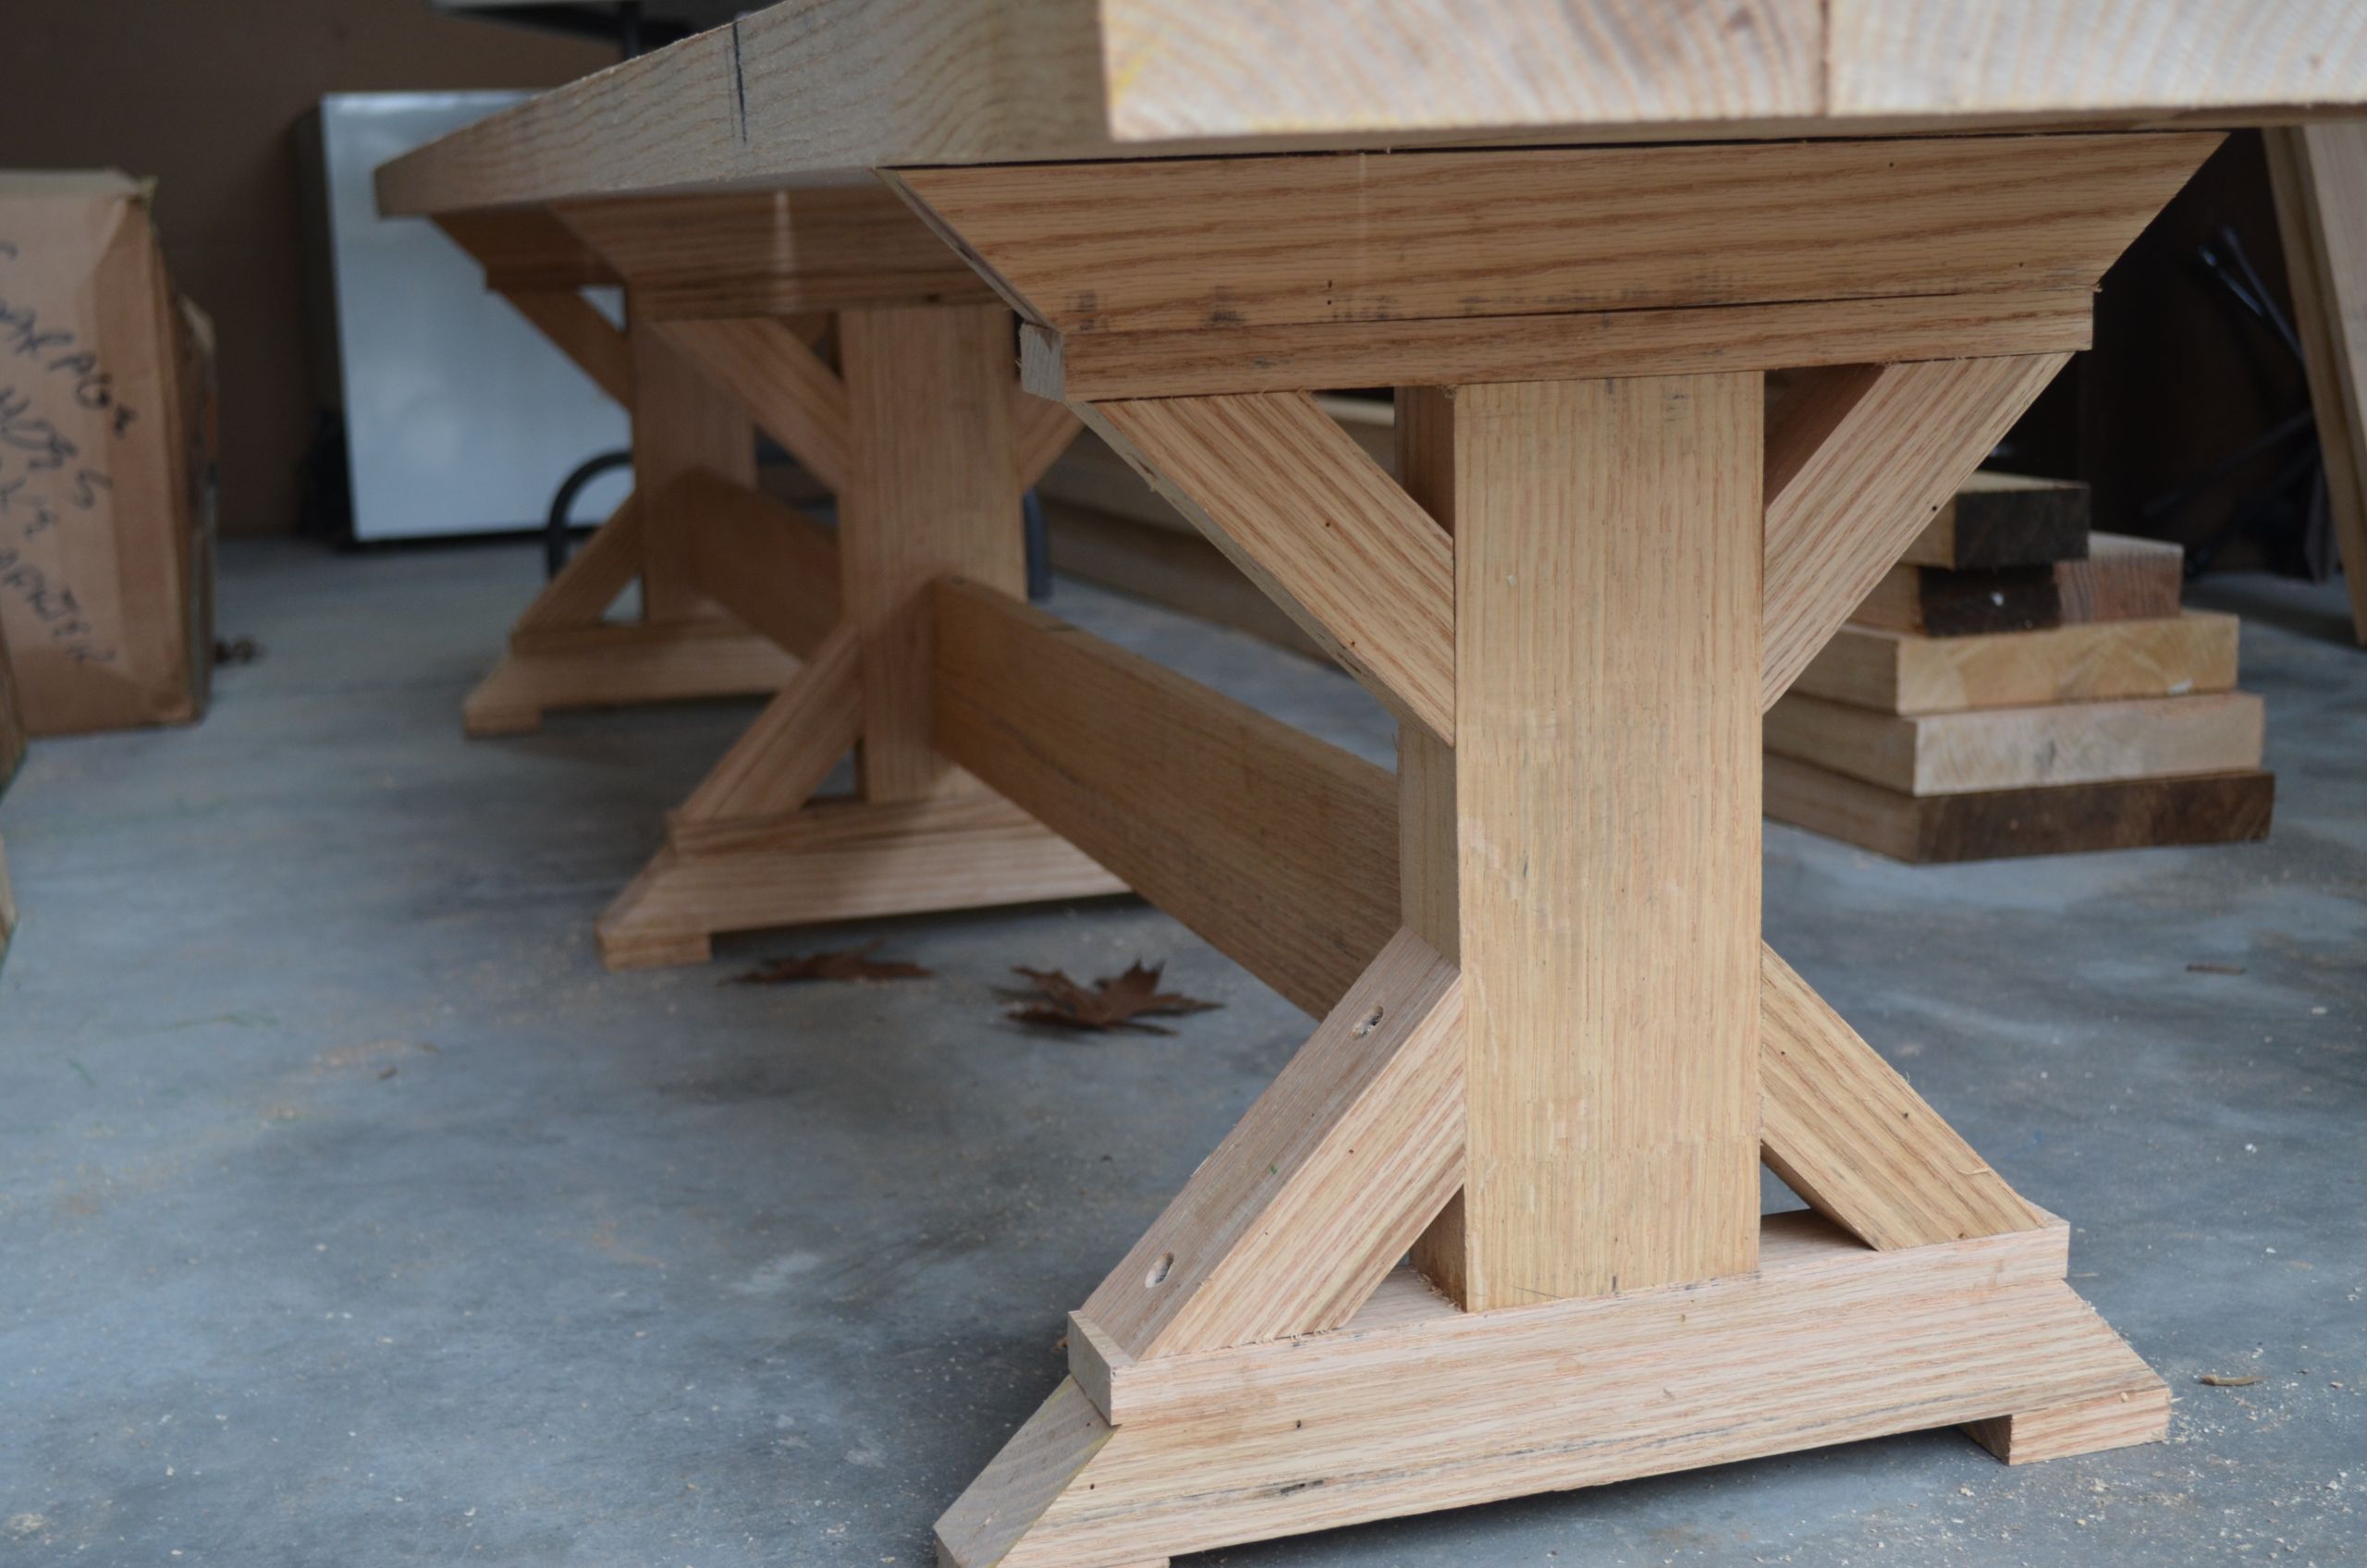 DIY Farmhouse Table Plans
 Our Fancy Smancy Farmhouse Table with matching benches